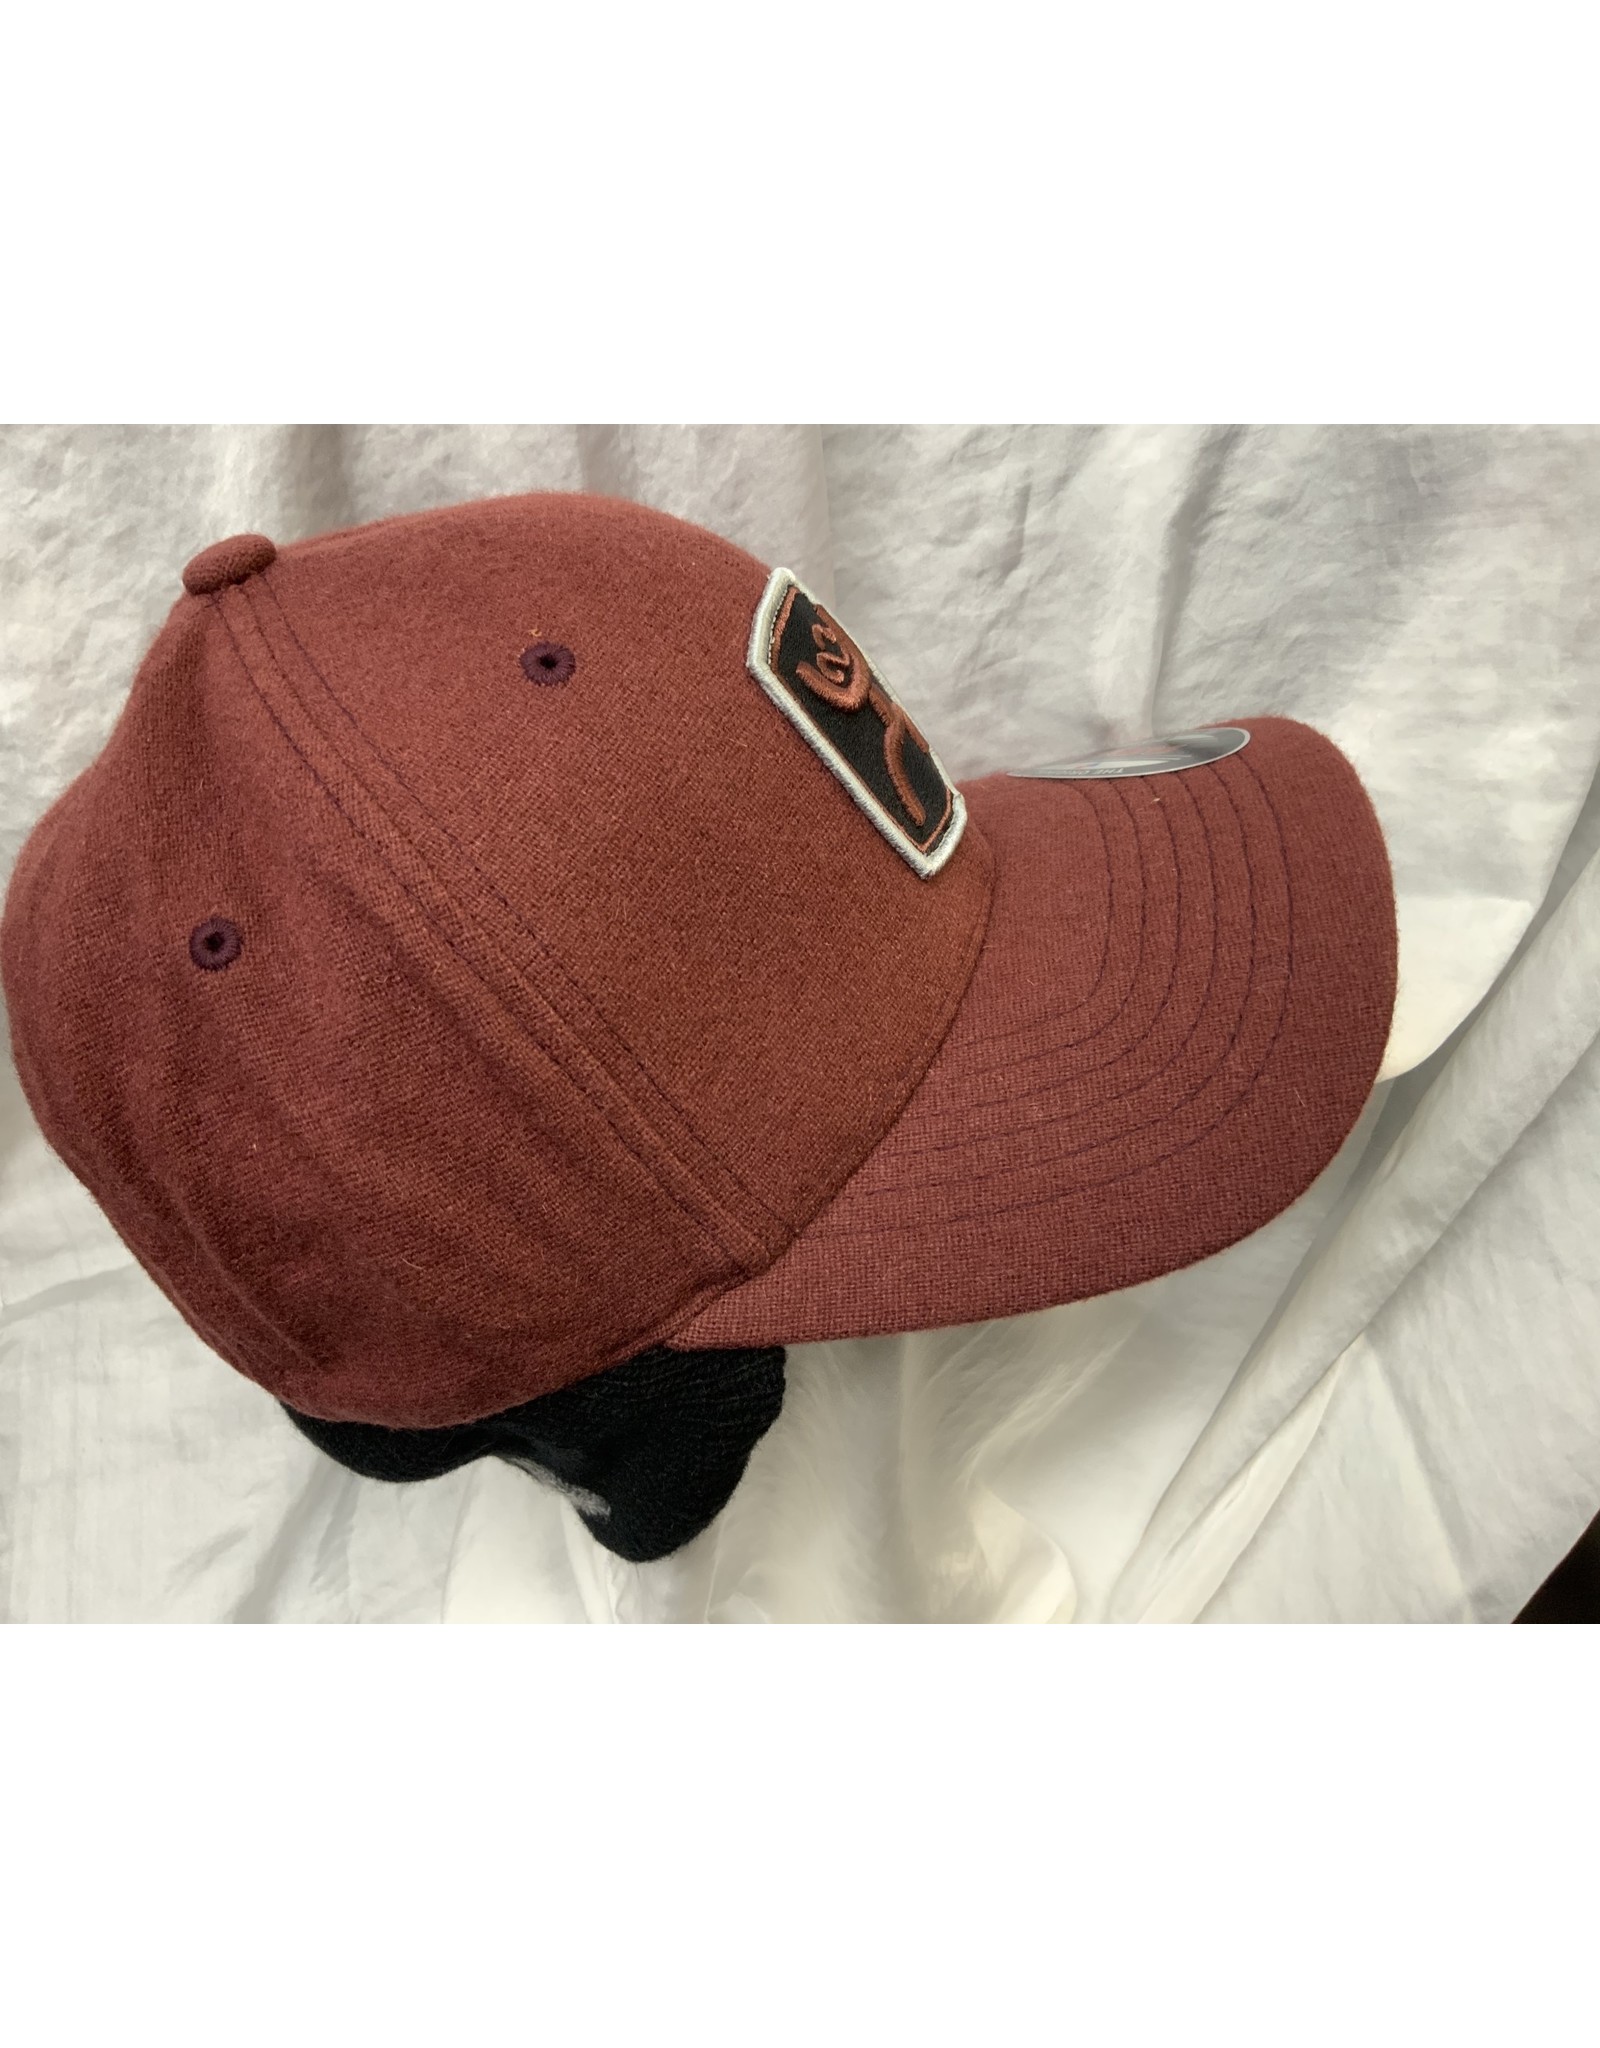 Hooey- Out cold- Maroon - L/XL